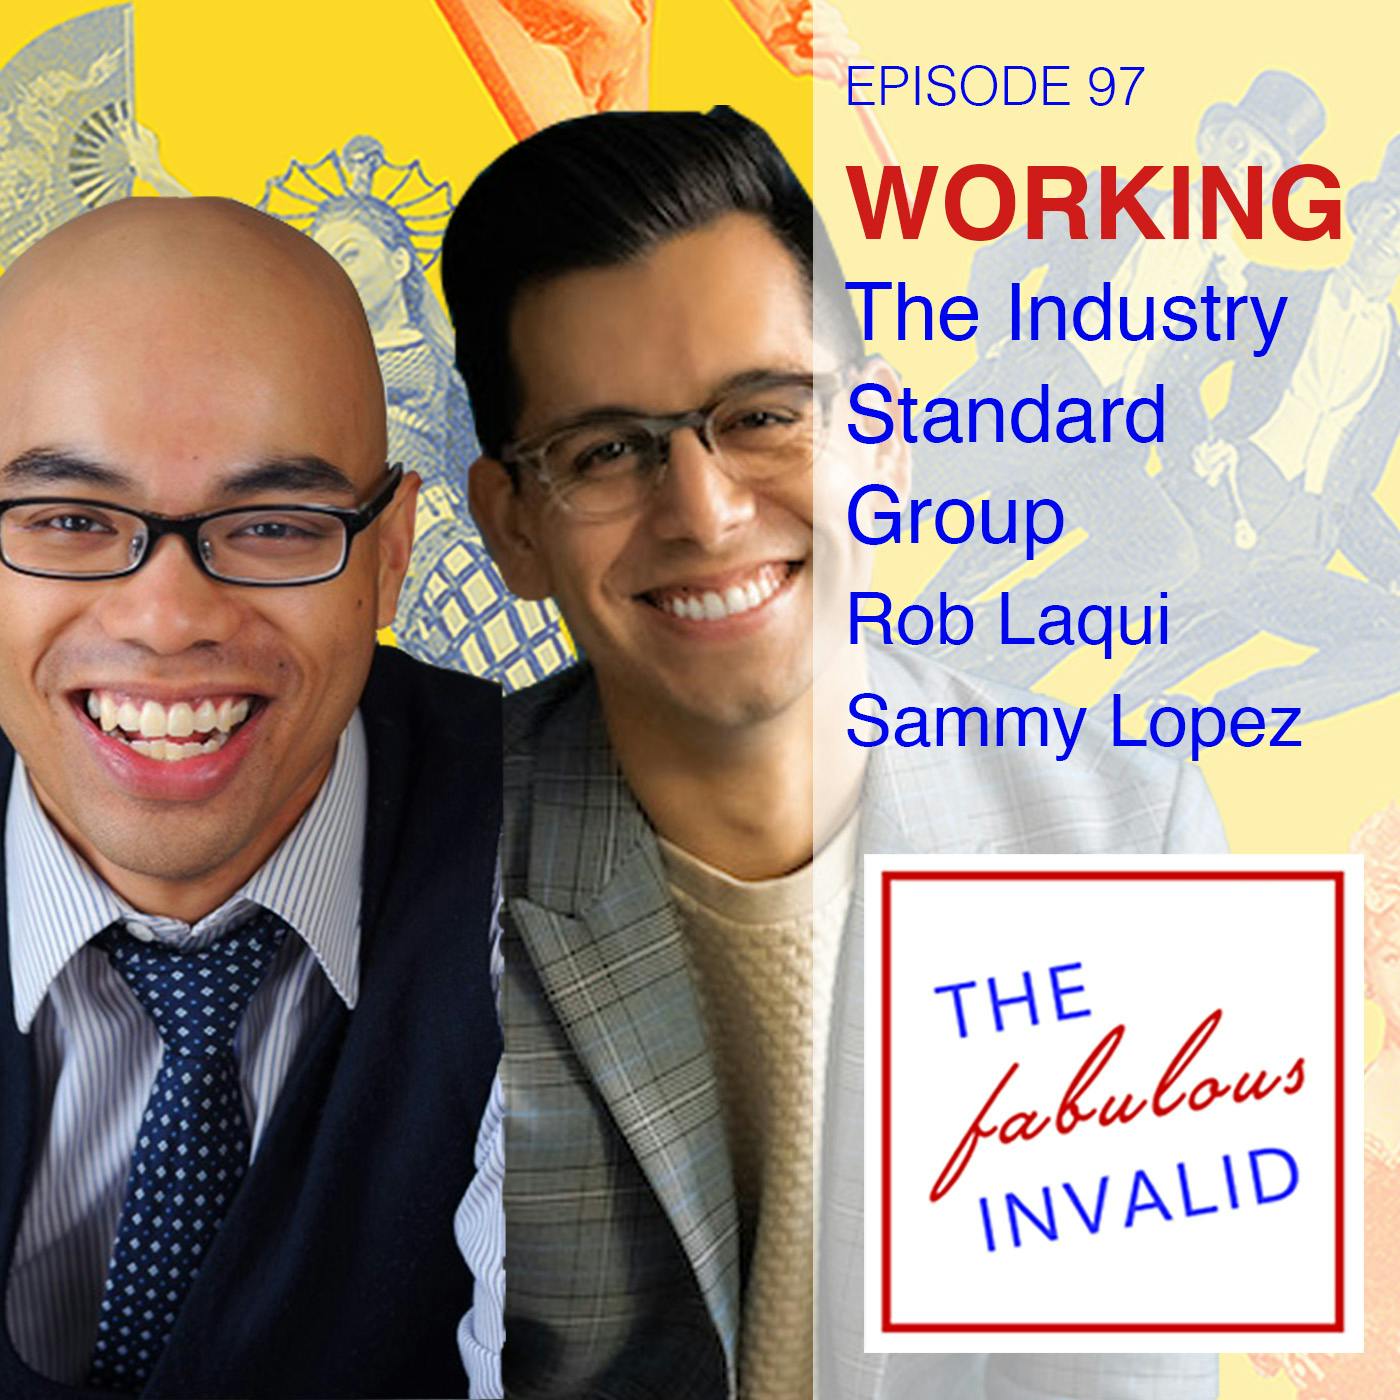 Episode 97: Working: The Industry Standard Group: Rob Laqui and Sammy Lopez